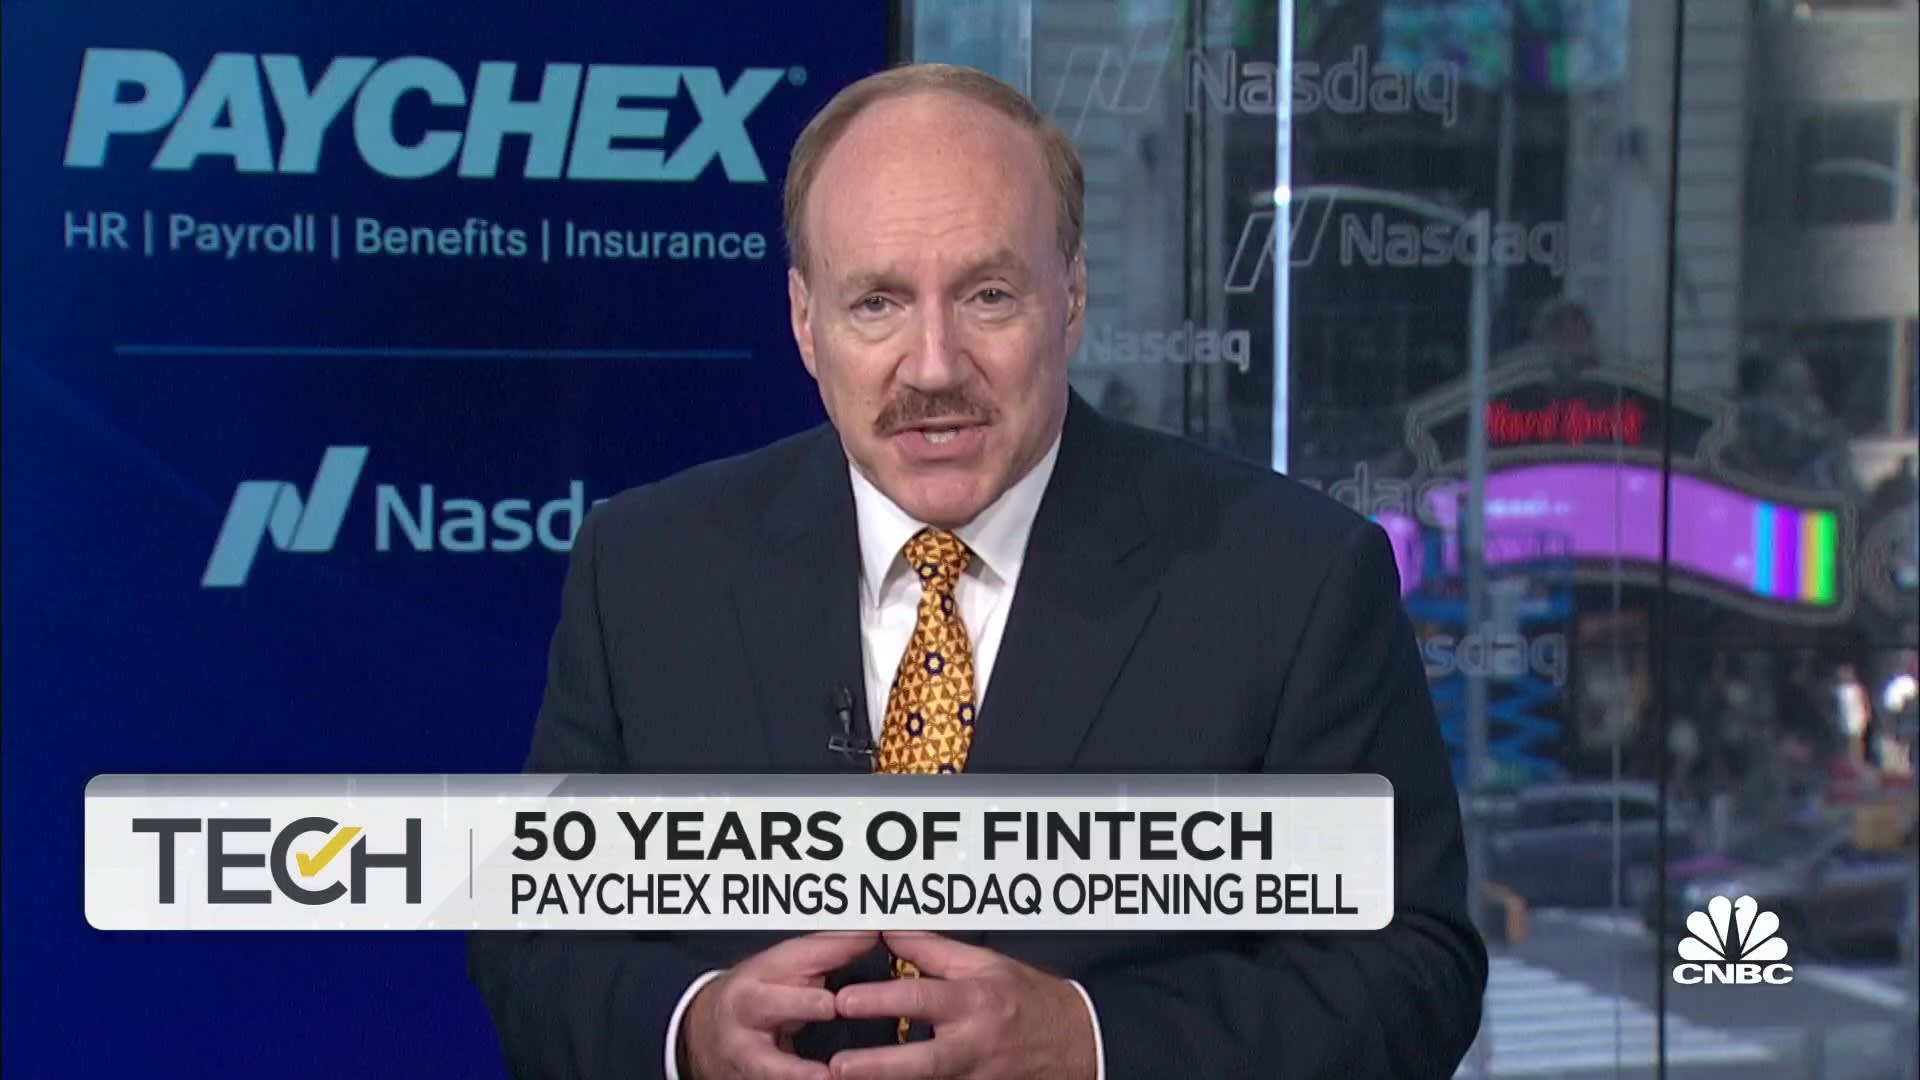 PayChex CEO on future of FinTech and buy now, pay later